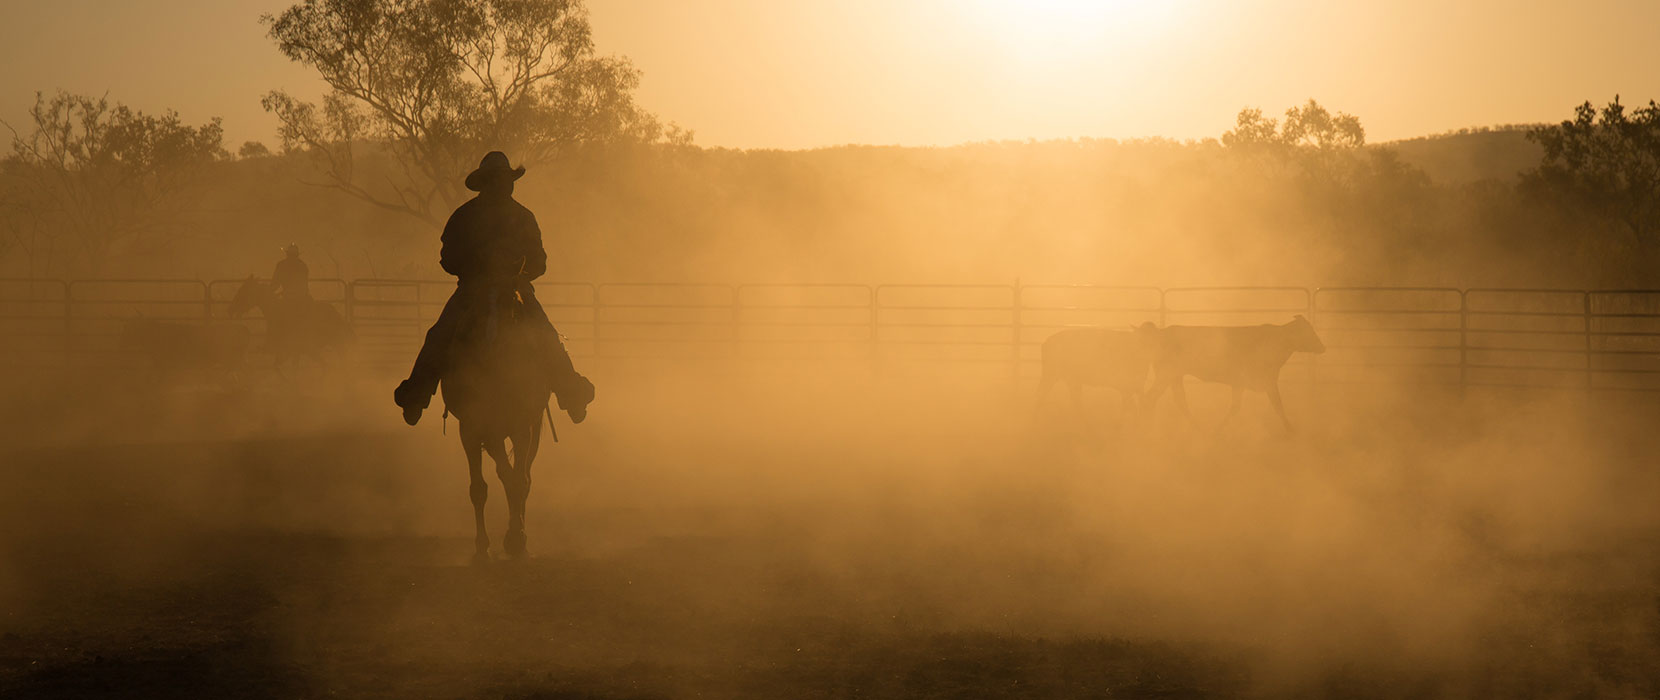 Dusty sunset with a cowboy on a horse mustering cattle.